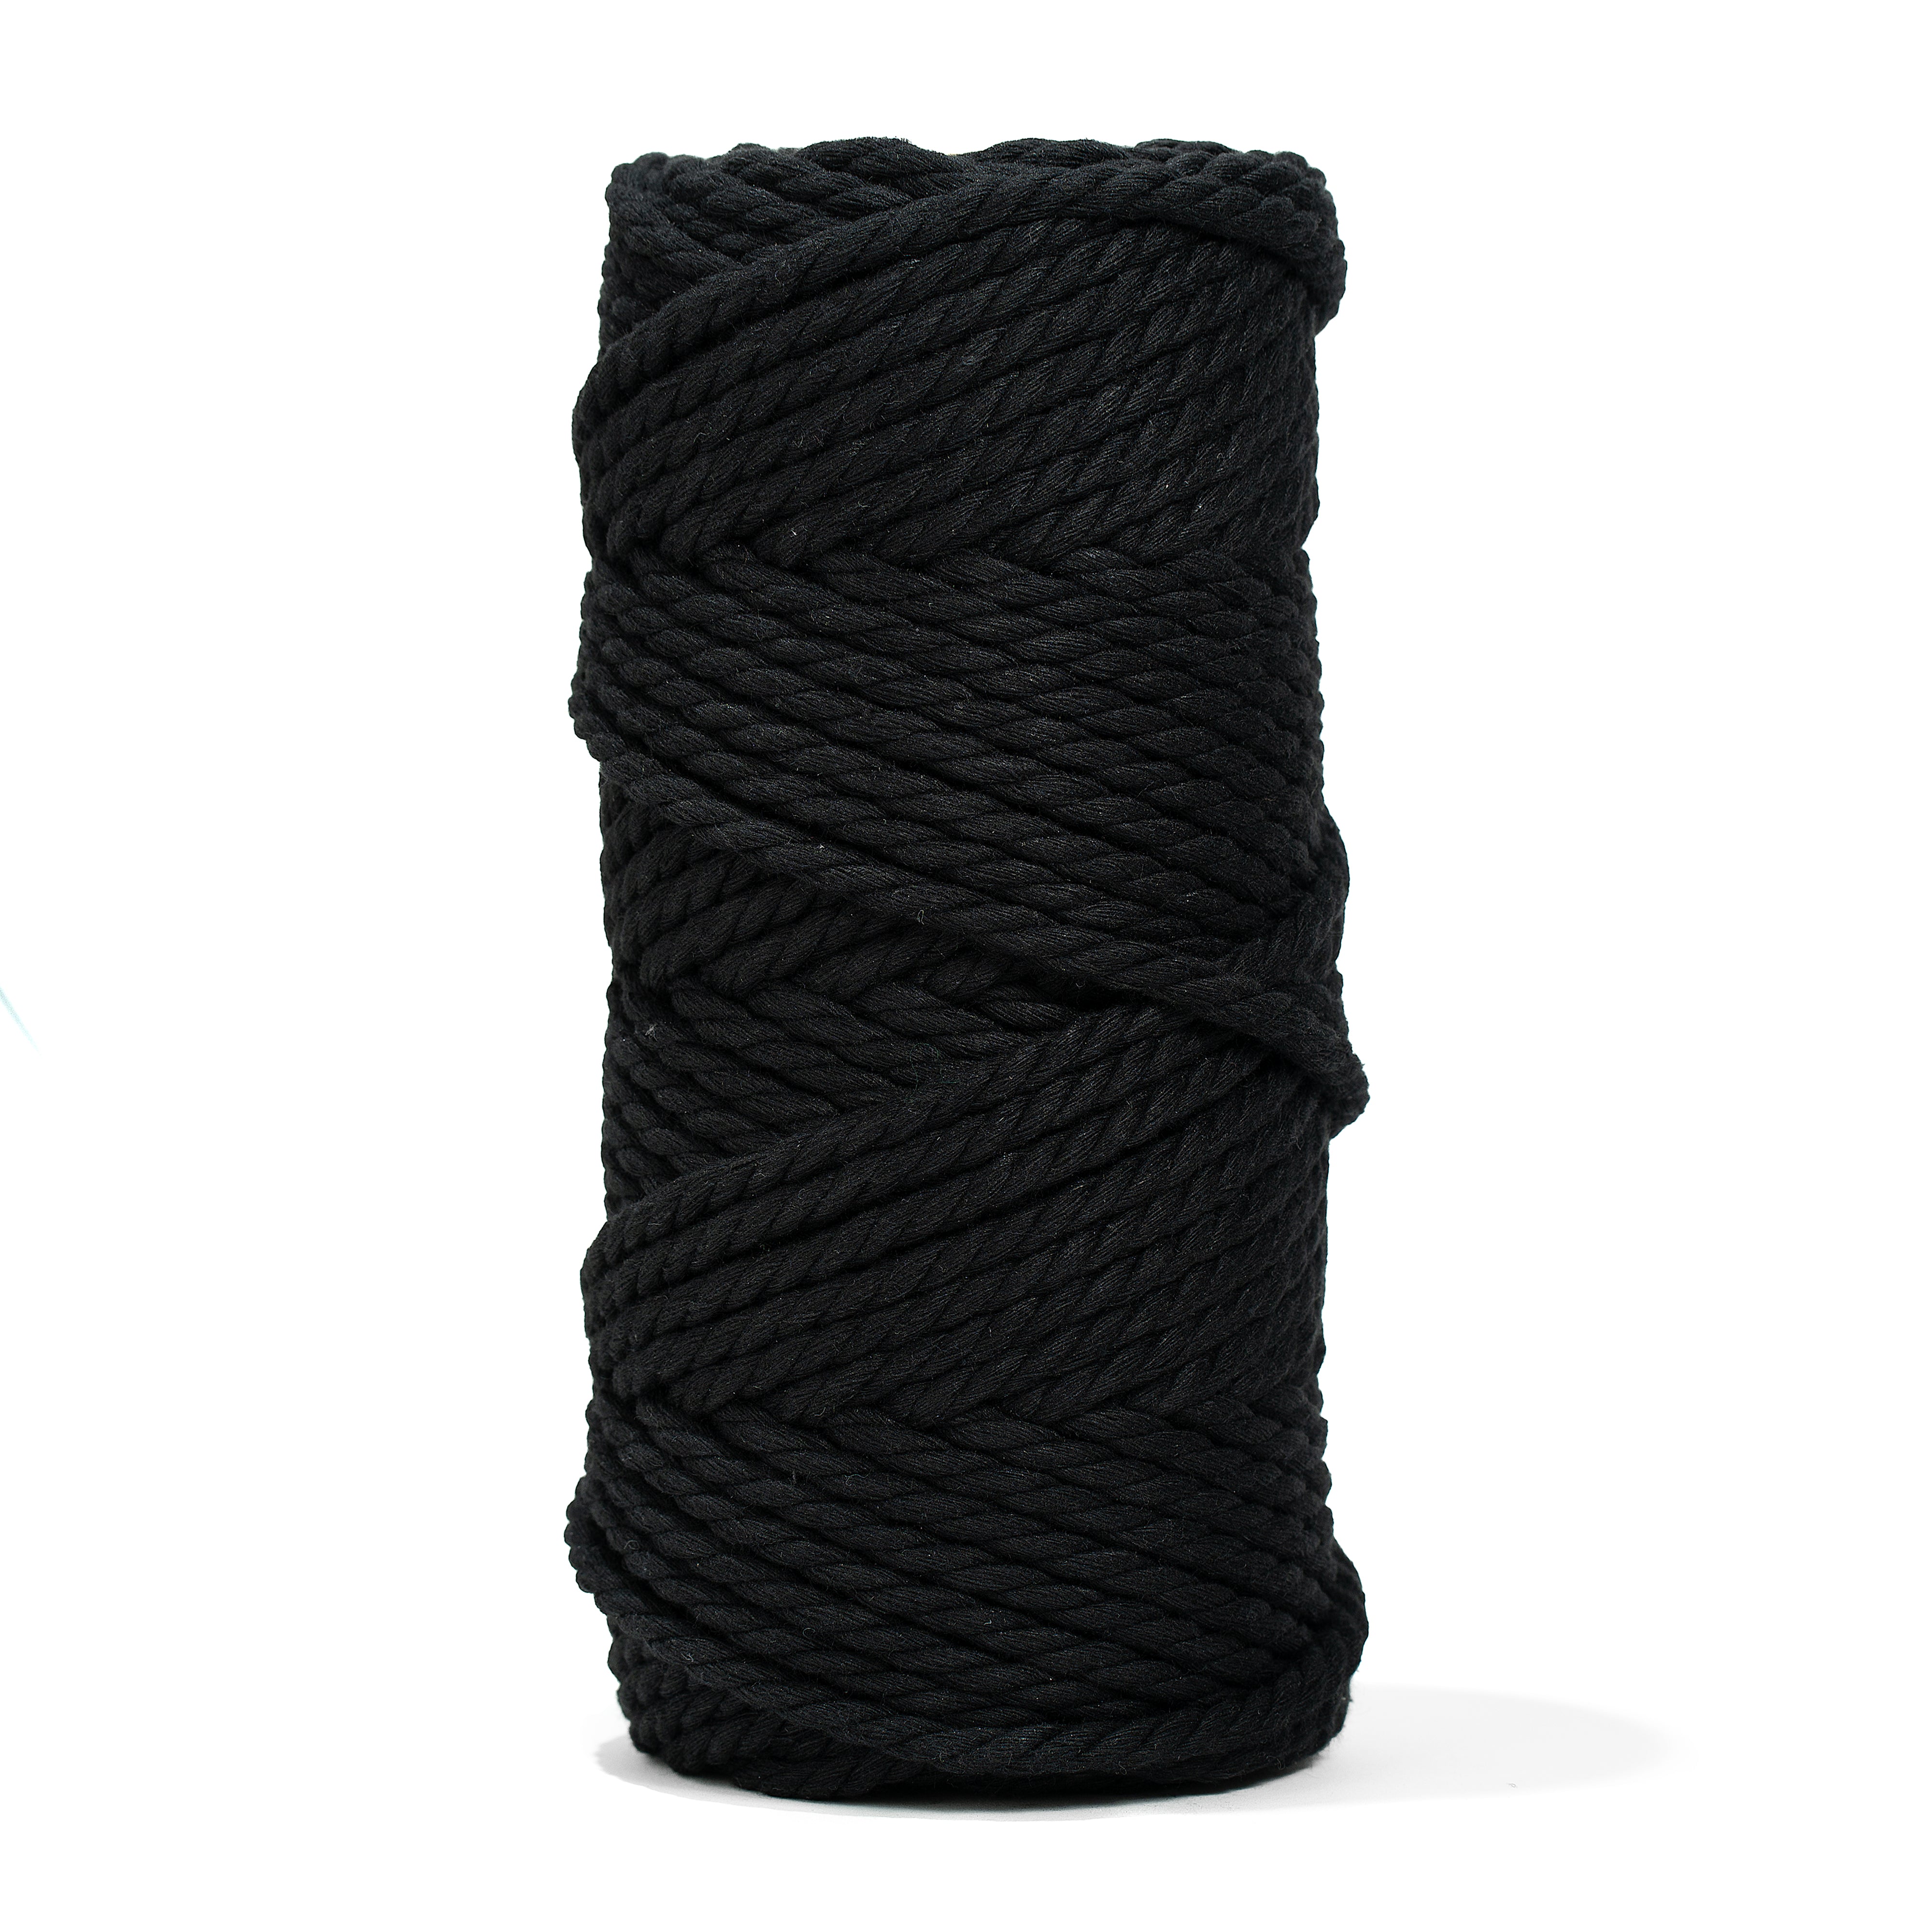 MACRAME COTTON ROPE 5 MM - 3 PLY - BLACK COLOR – GANXXET